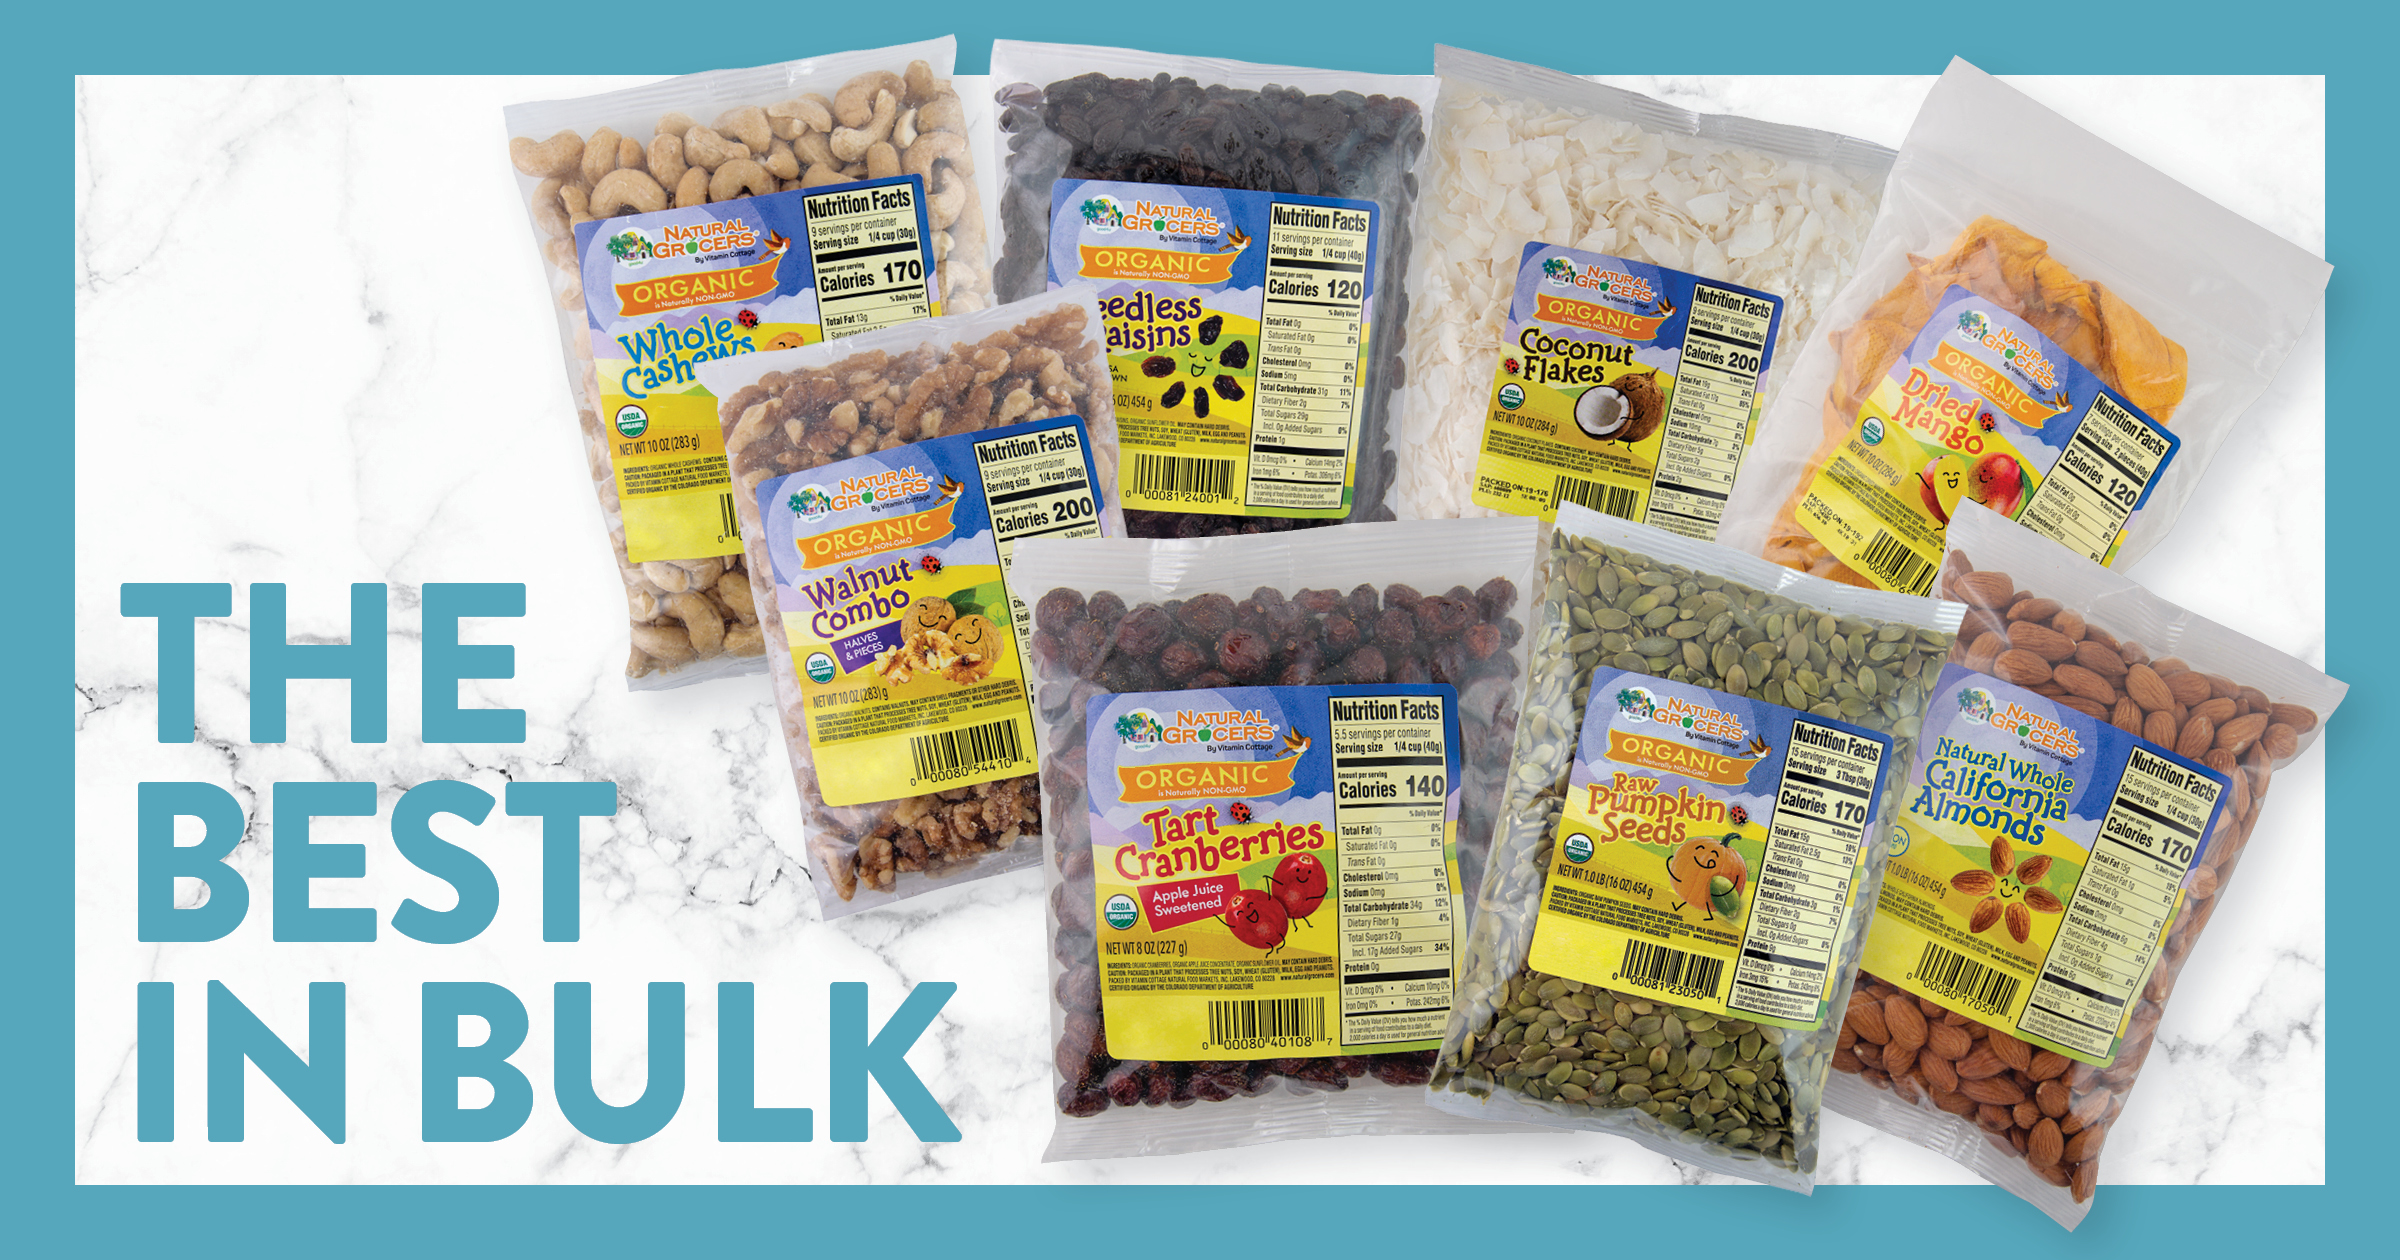 Natural Grocers Brand Products - Bulk